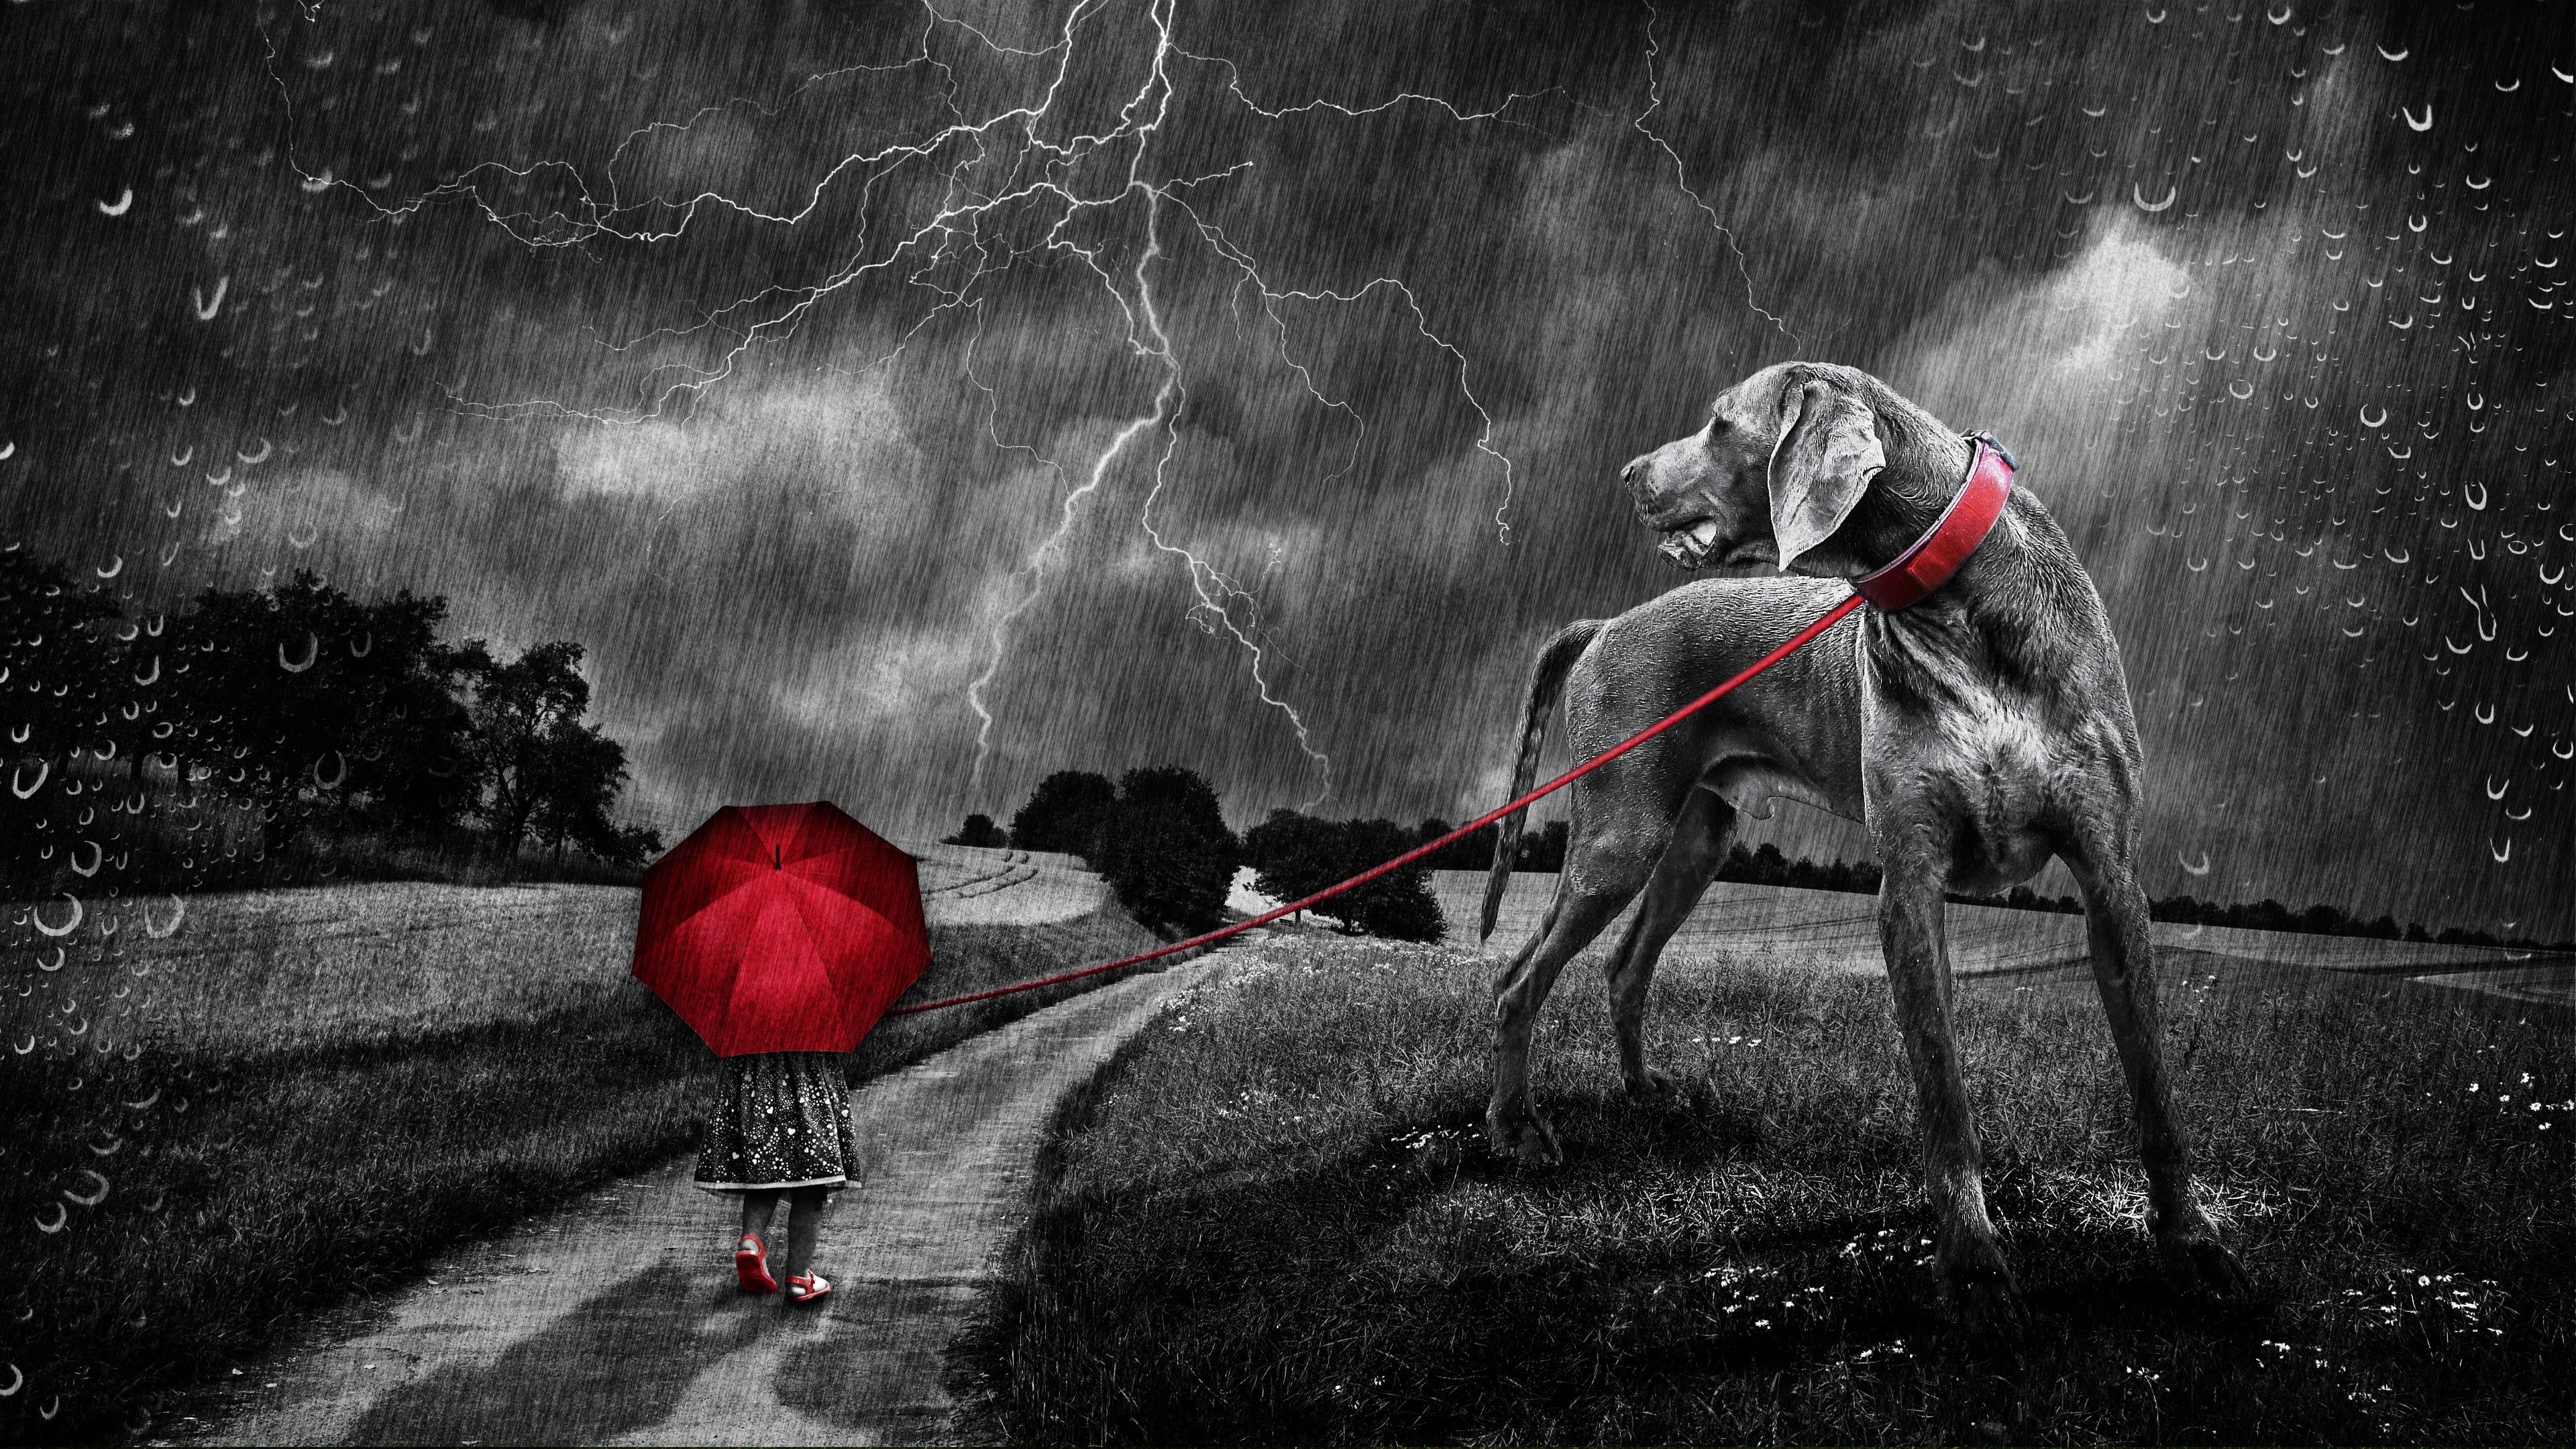 Red Umbrella Painting Wallpapers